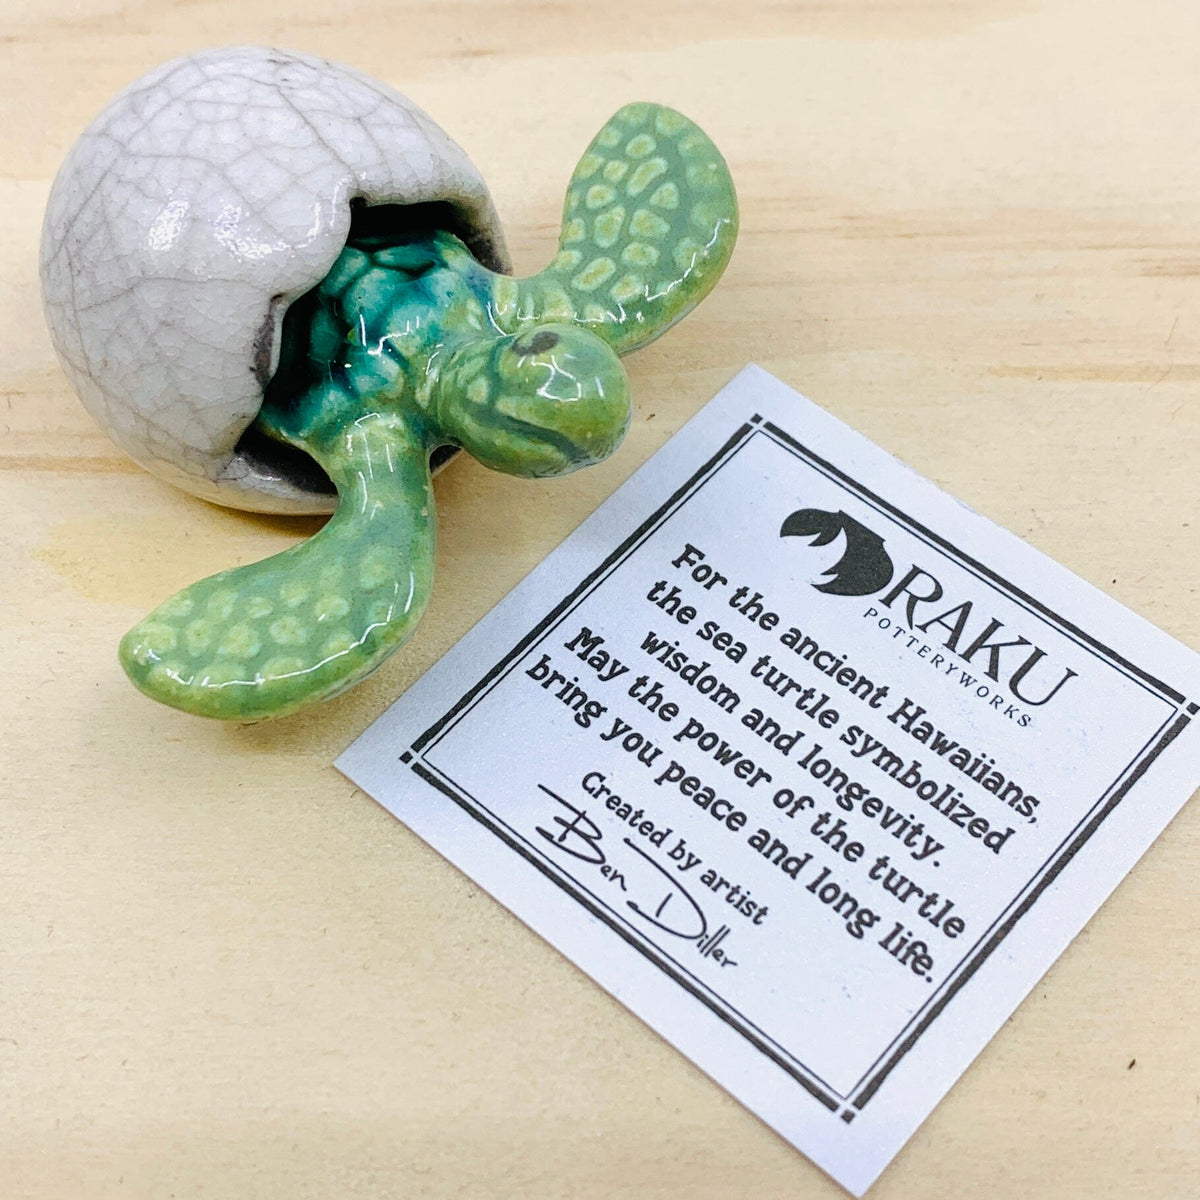 Turtle Hatchling, Green Miniature Joy Crafters INC 